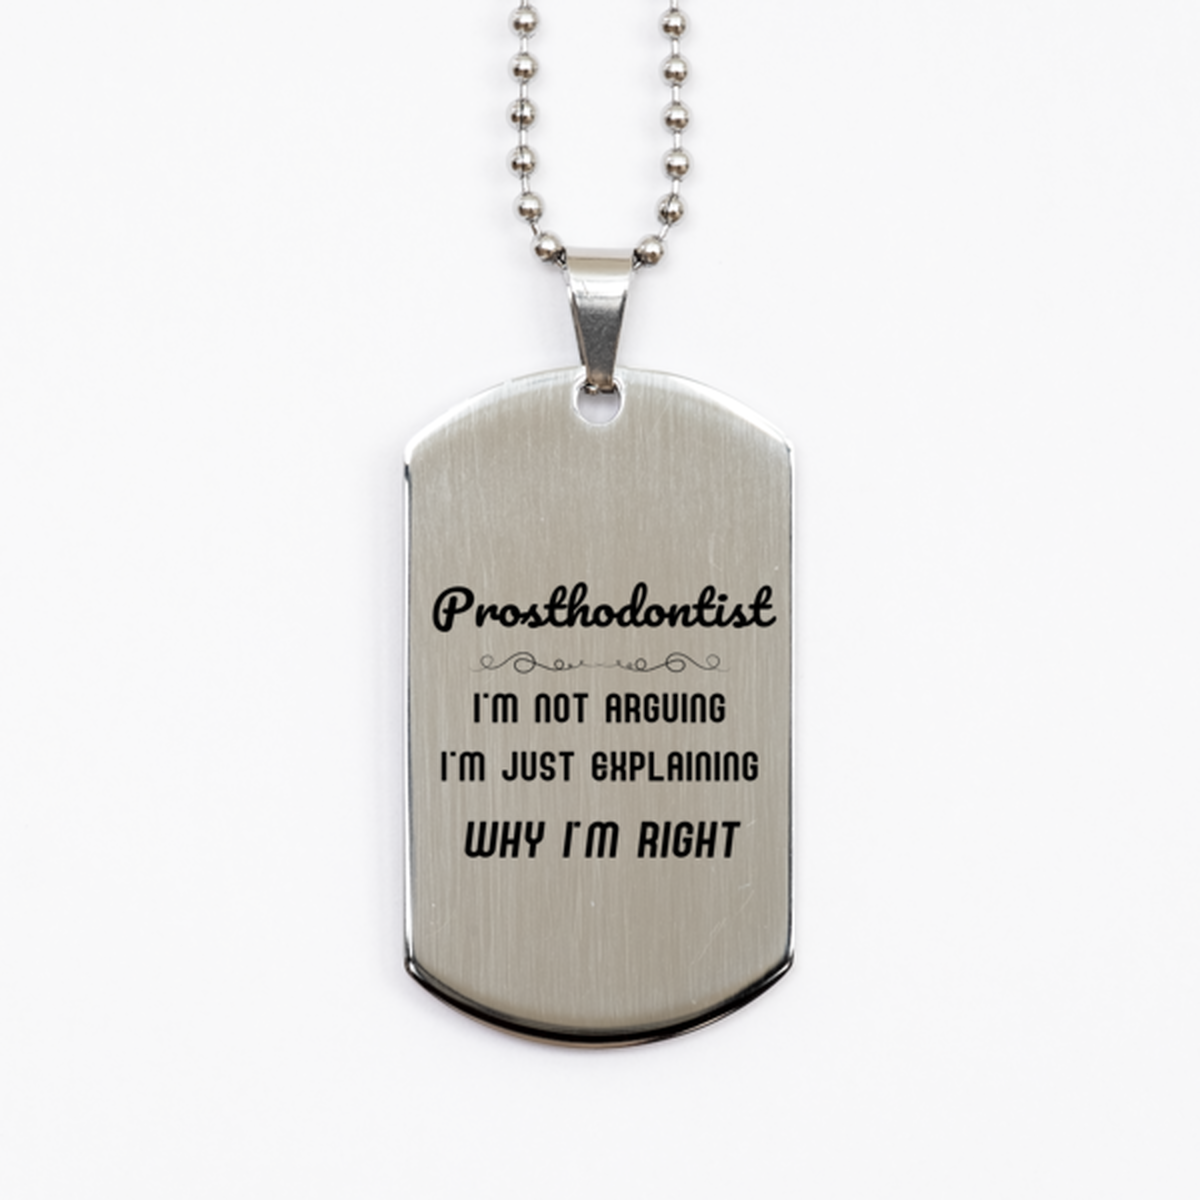 Prosthodontist I'm not Arguing. I'm Just Explaining Why I'm RIGHT Silver Dog Tag, Funny Saying Quote Prosthodontist Gifts For Prosthodontist Graduation Birthday Christmas Gifts for Men Women Coworker